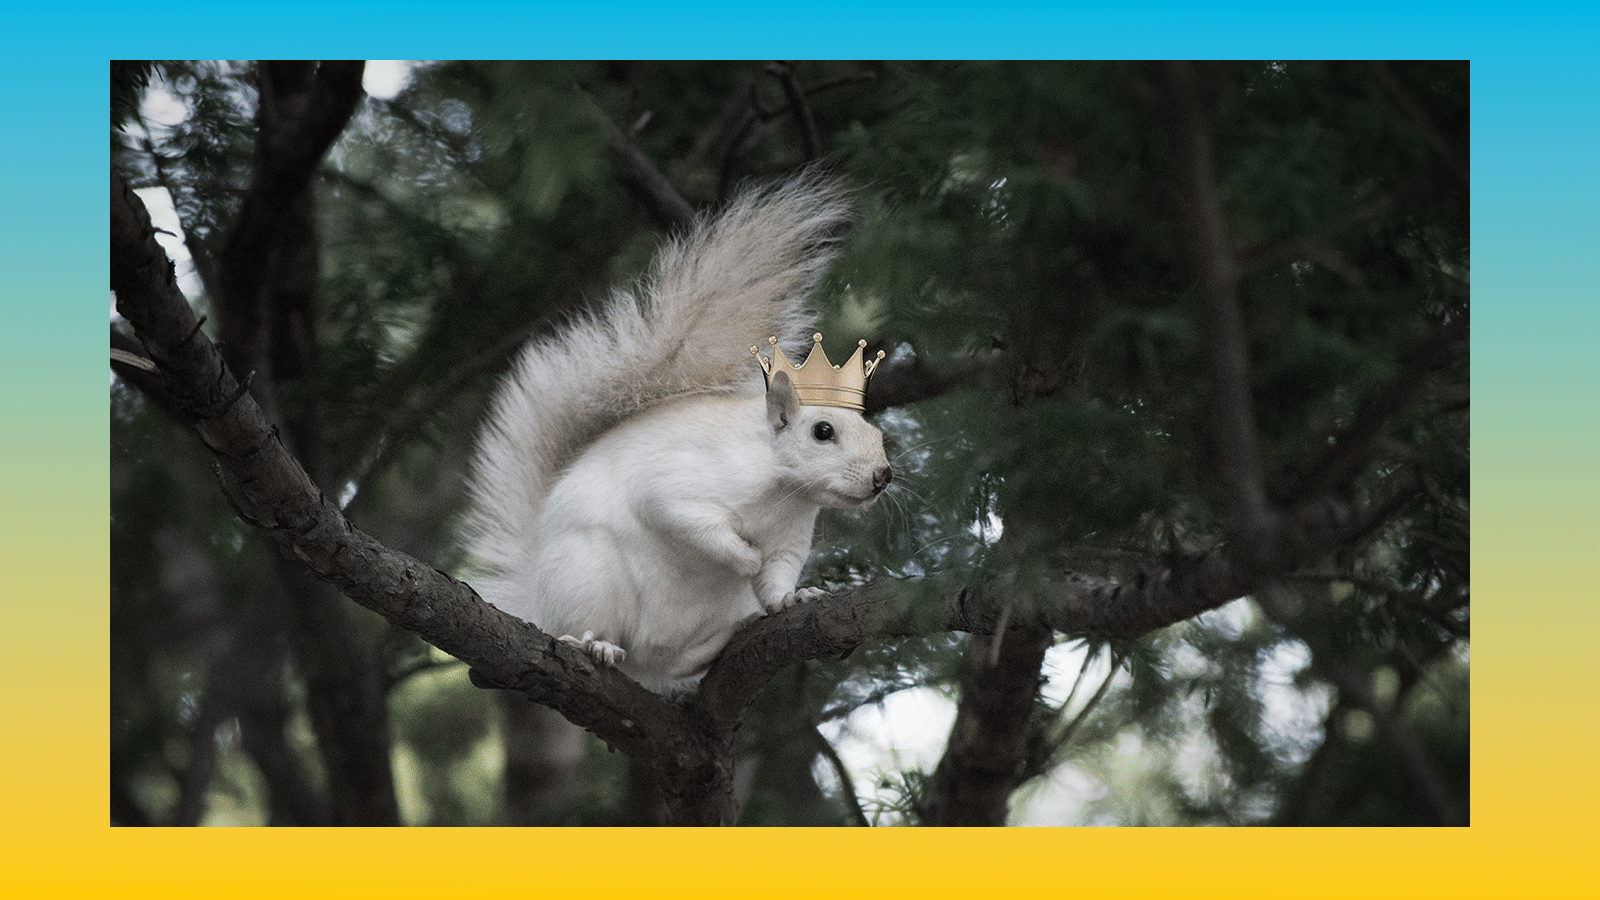 A squirrel sits on a tree branch wearing a golden crown on it's head.